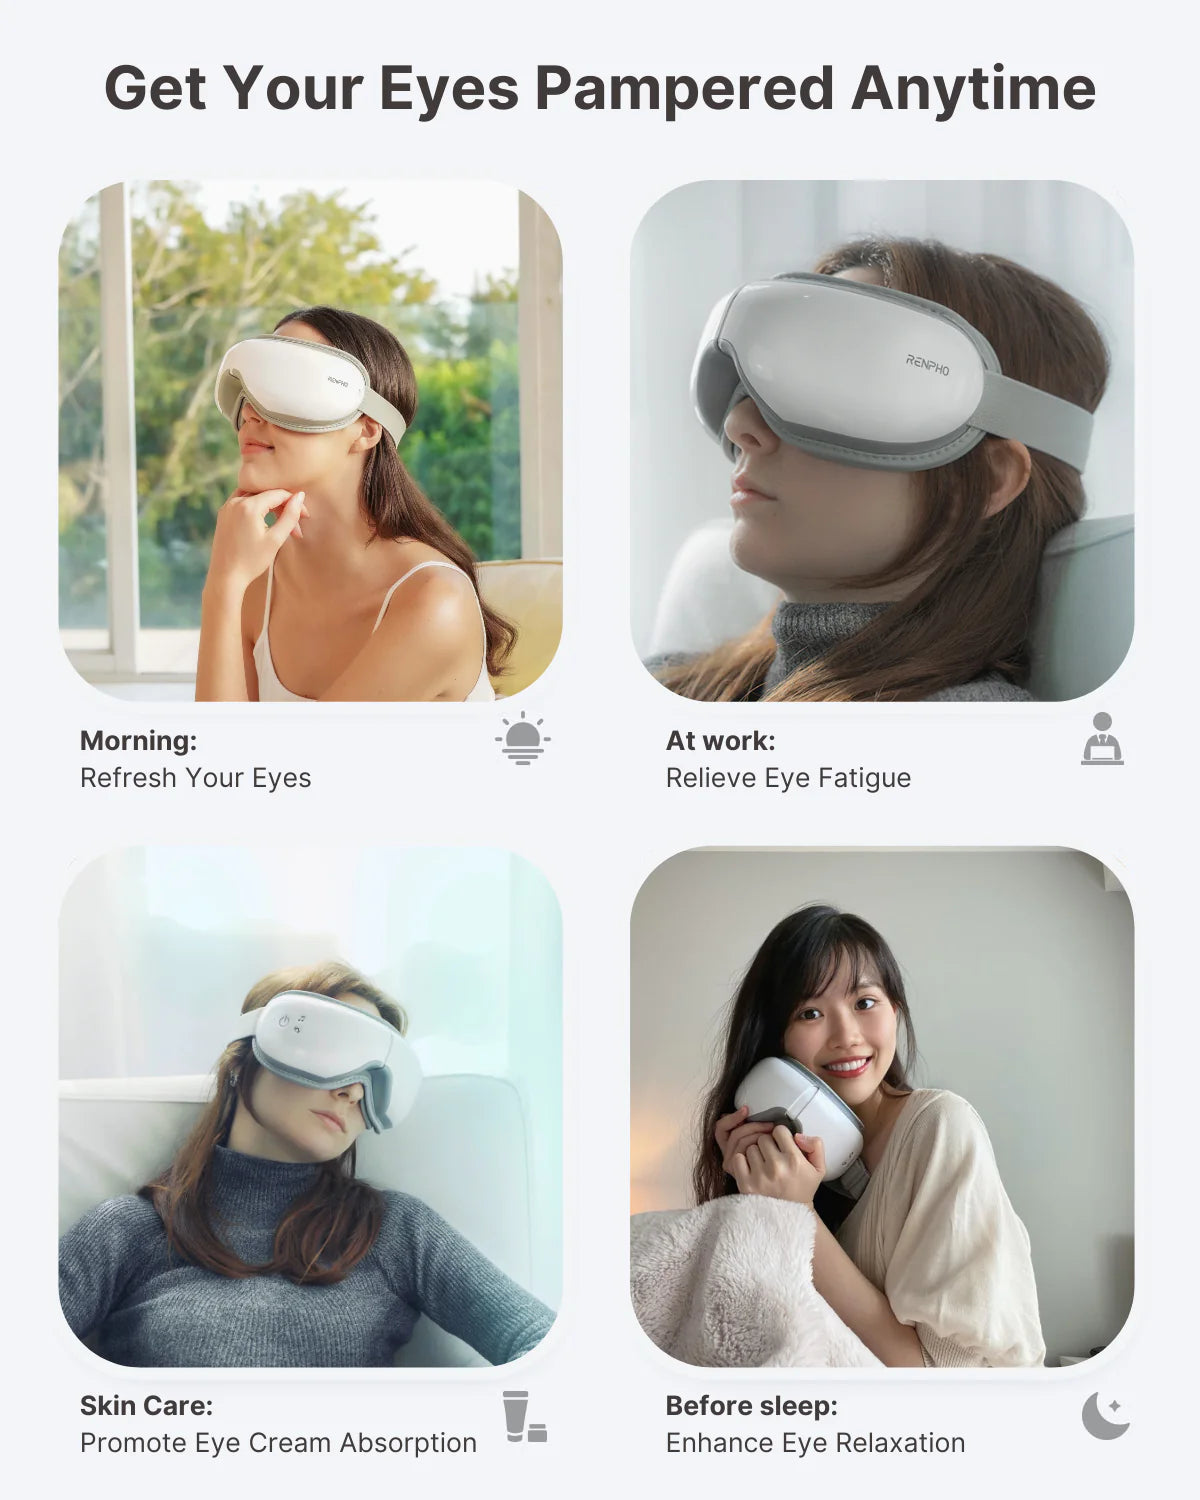 Image showing four different individuals using a white Eyeris 1 Eye Massager by Renpho EU in various settings. Upper left: woman in white tank top using it in the morning. Upper right: woman in brown sweater using it at work to relieve eye strain. Lower left: woman in blue sweater using it for skincare. Lower right: woman in beige sweater using it before sleep. Bold text at the top reads "Get Your Eyes Pam